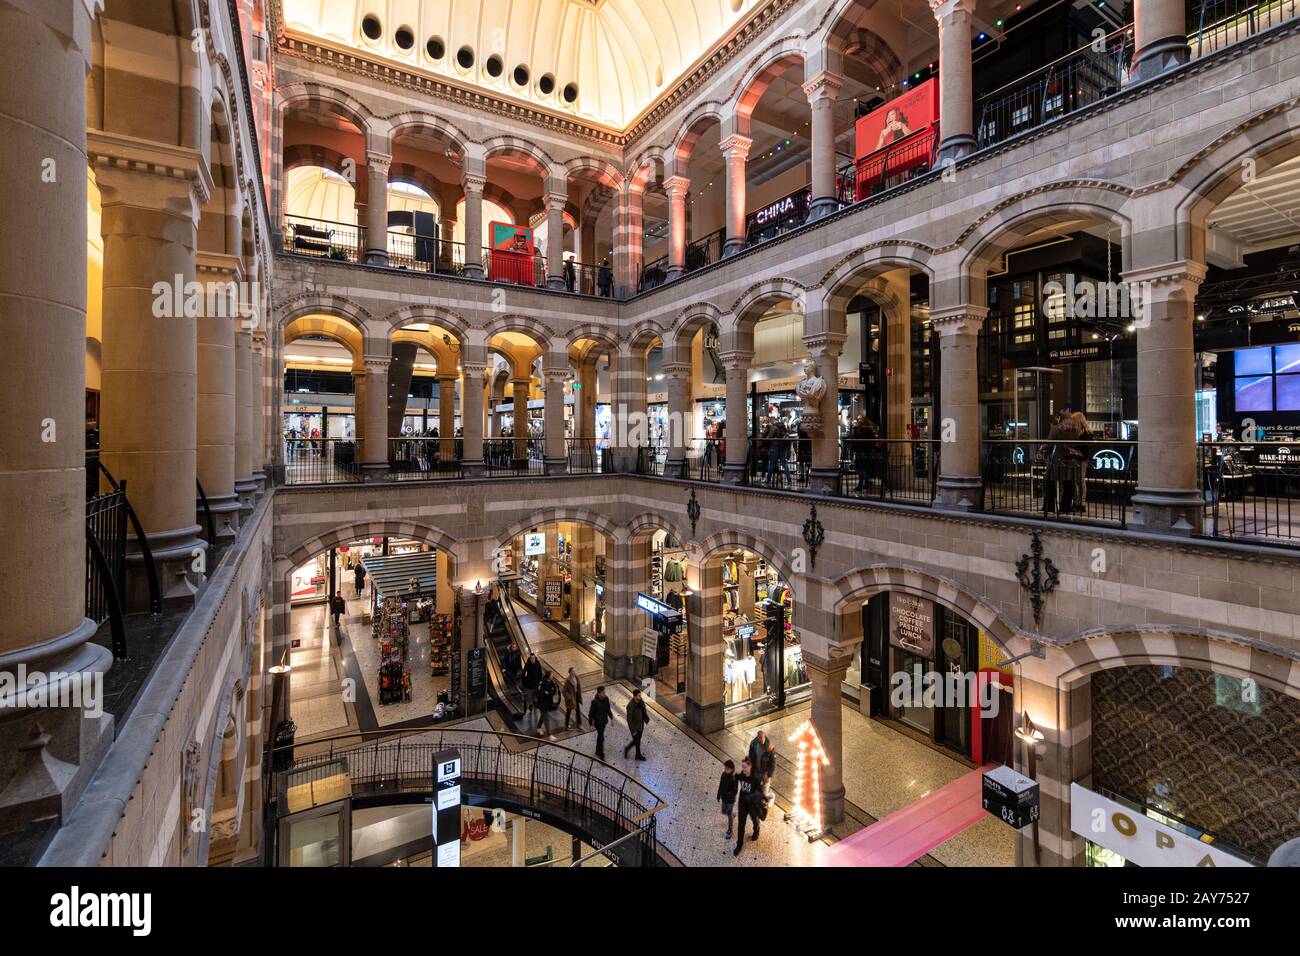 Amsterdam, Netherlands - January 30 2020: People strall inside the luxury Magna Plaza shopping mall in Amsterdam. The building dates from the 19th cen Stock Photo